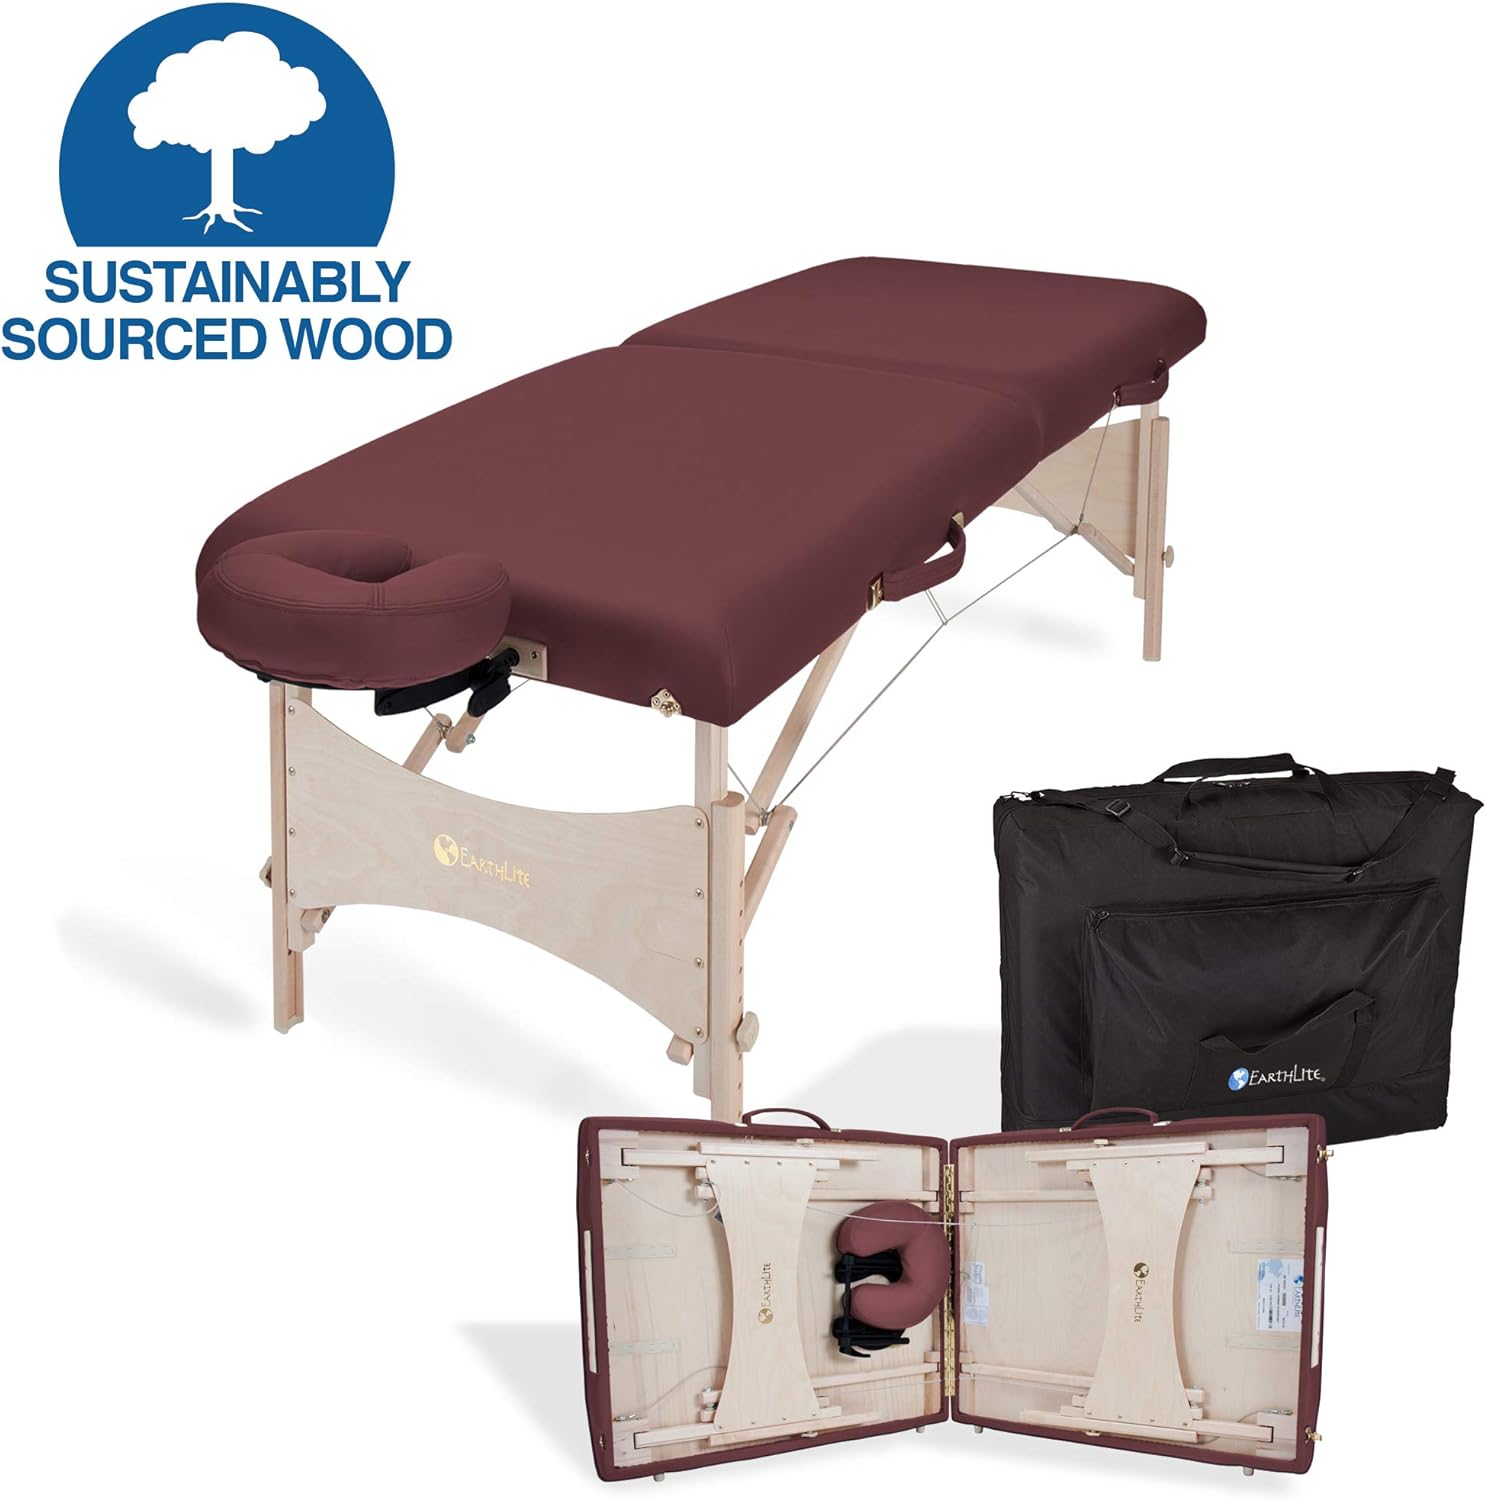 EARTHLITE Portable Massage Table HARMONY DX – Foldable Physiotherapy/Treatment/Stretching Table, Eco-Friendly Design, Hard Maple, Superior Comfort incl. Face Cradle & Carry Case (30" x 73")